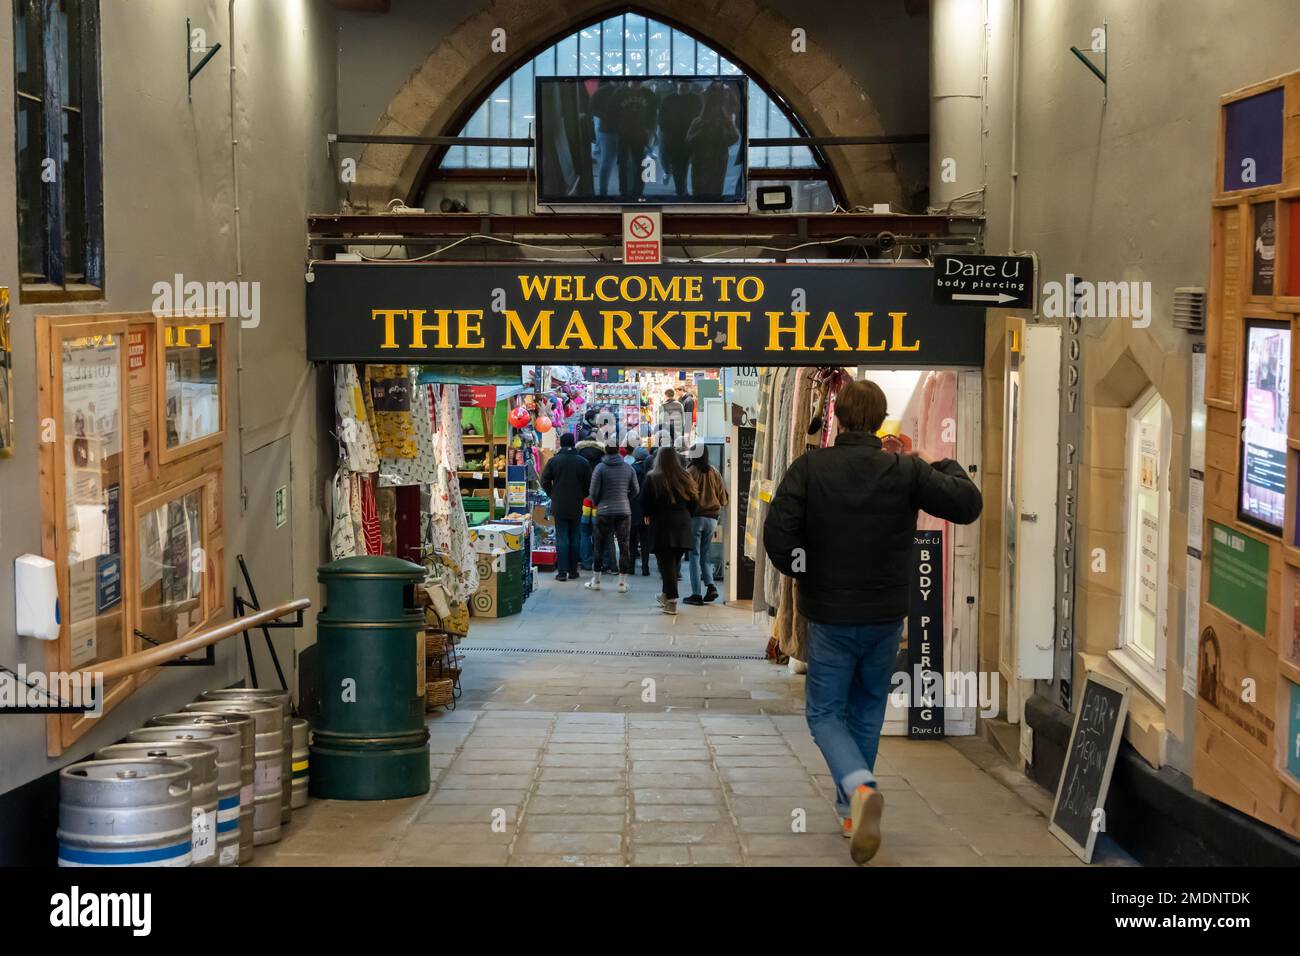 Entrance to The Market Hall - a space for small businesses in the city of Durham, UK, to trade. Stock Photo